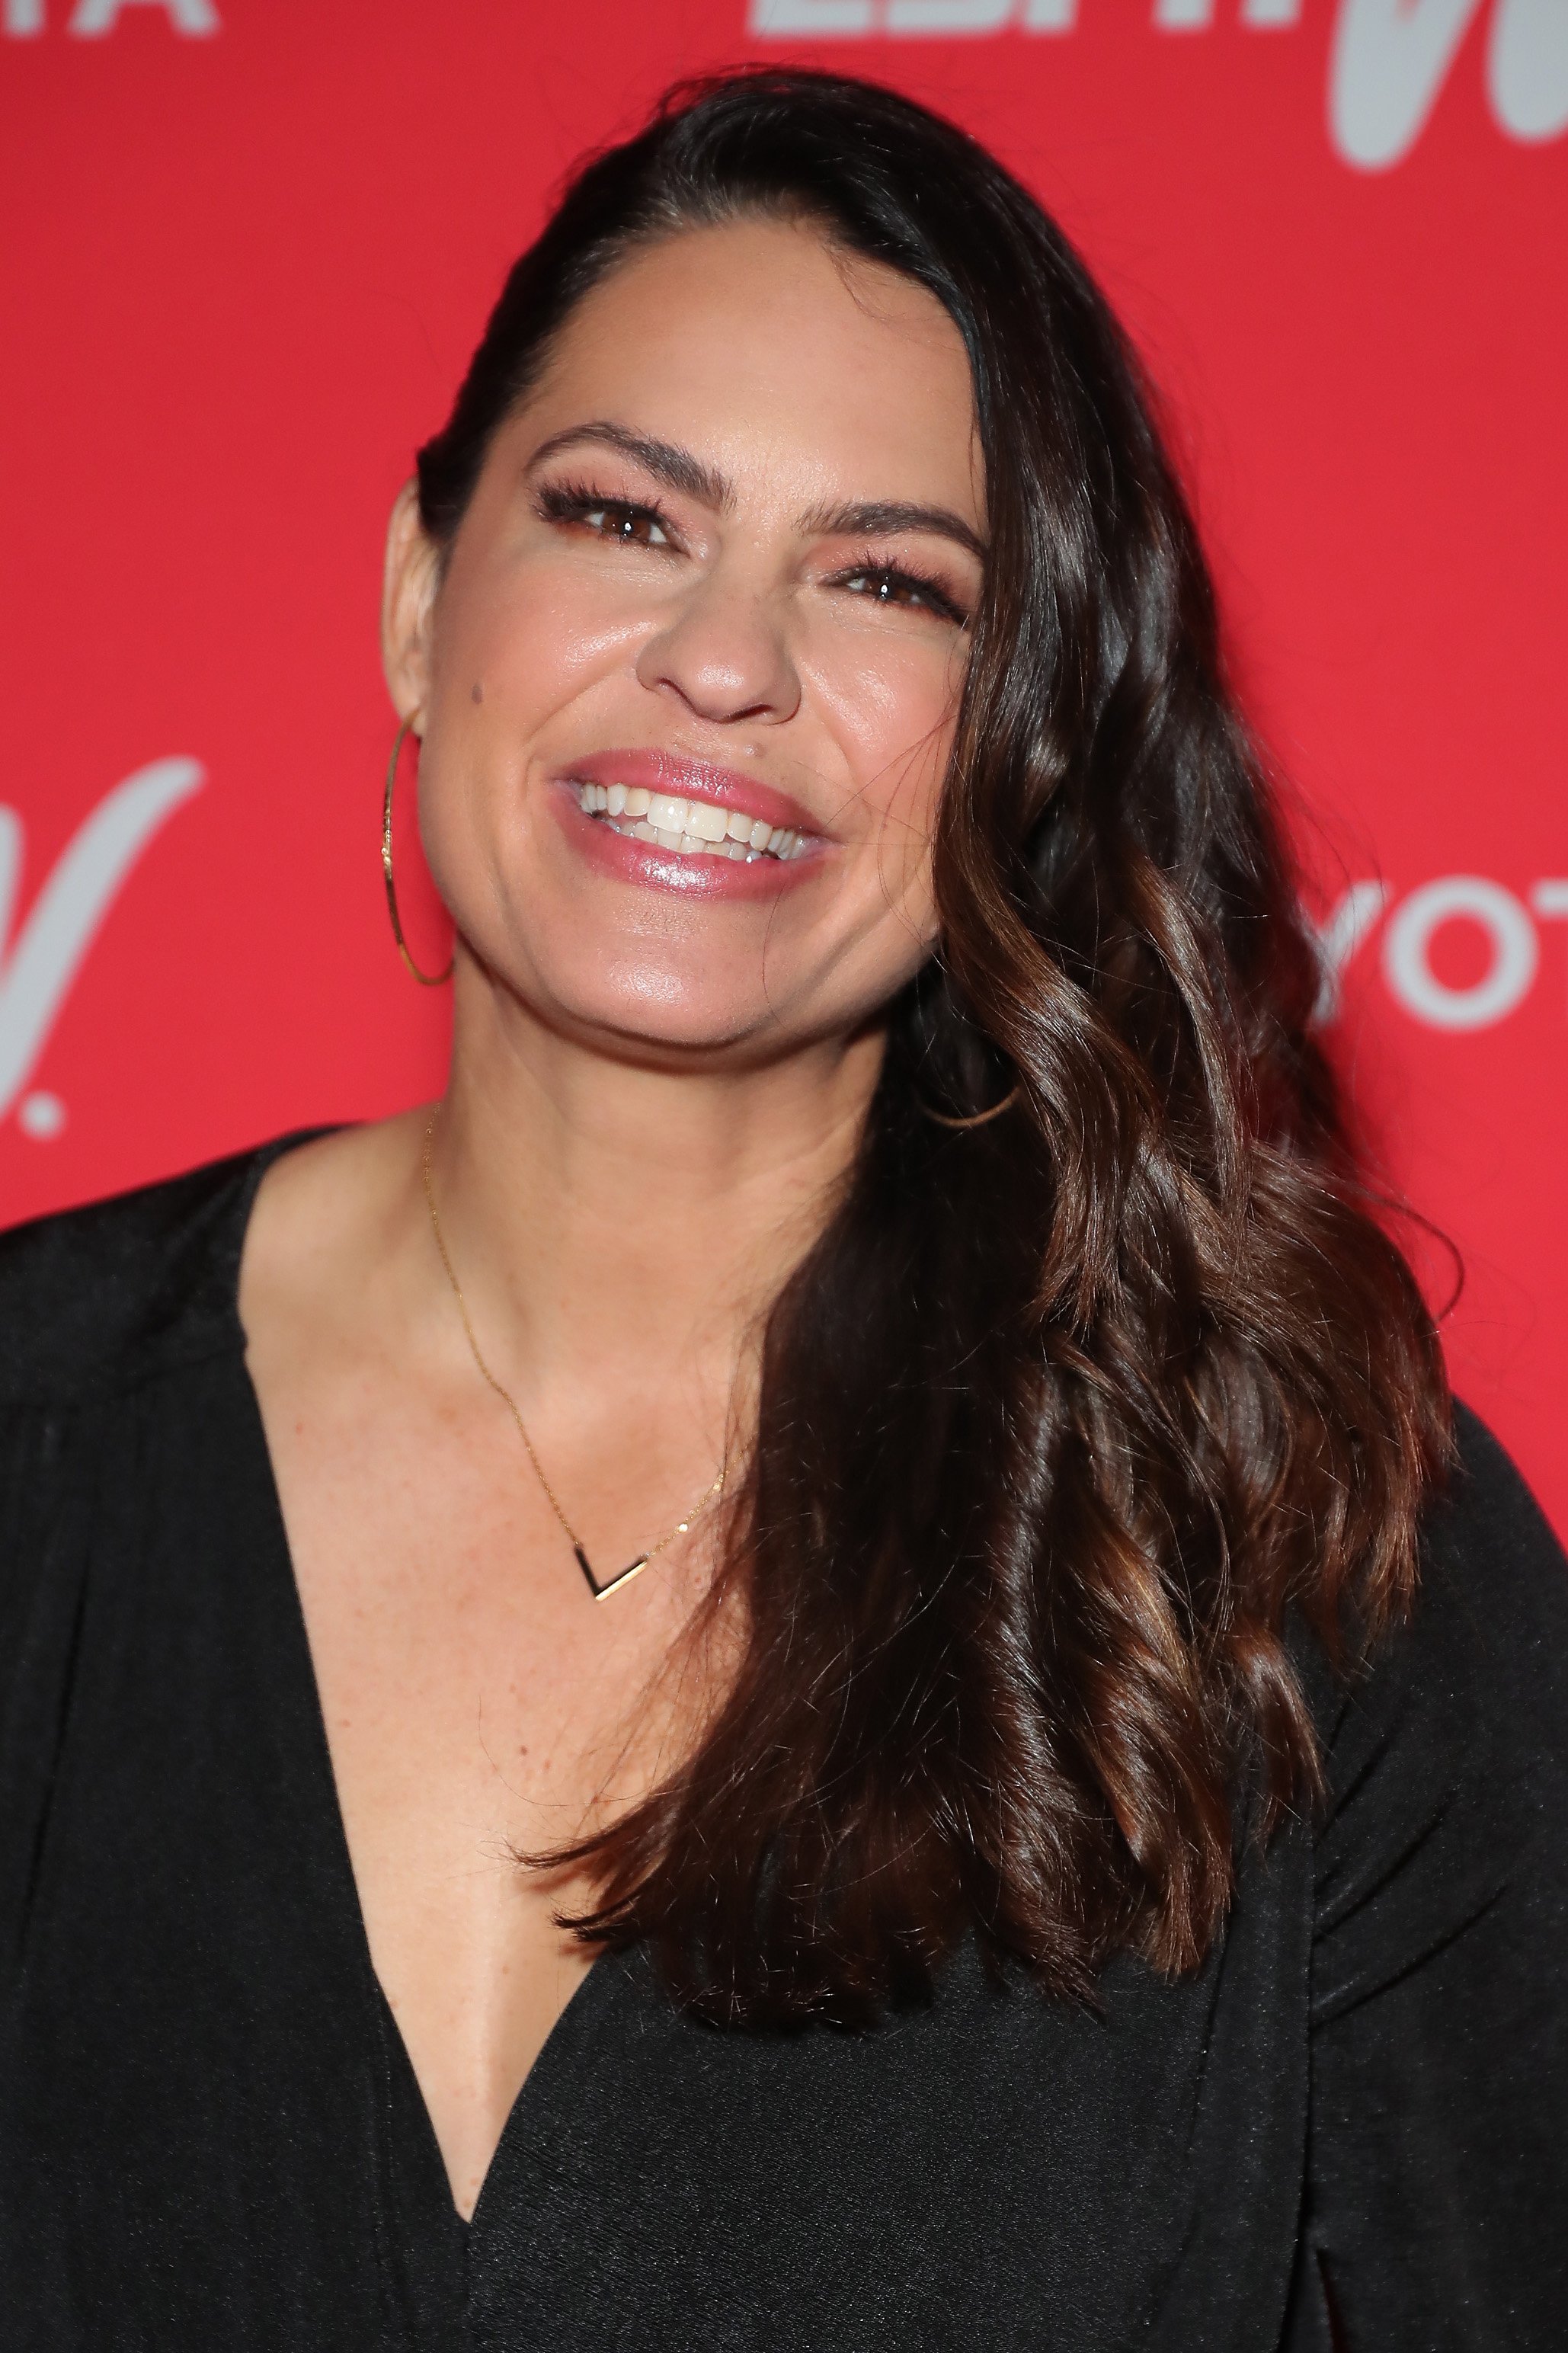 Jessica Mendoza is pictured at Day 1 of The Annual espnW: Women + Sports Summit at The Lodge at Torrey Pines on October 18, 2021, in La Jolla, California | Source: Getty Images